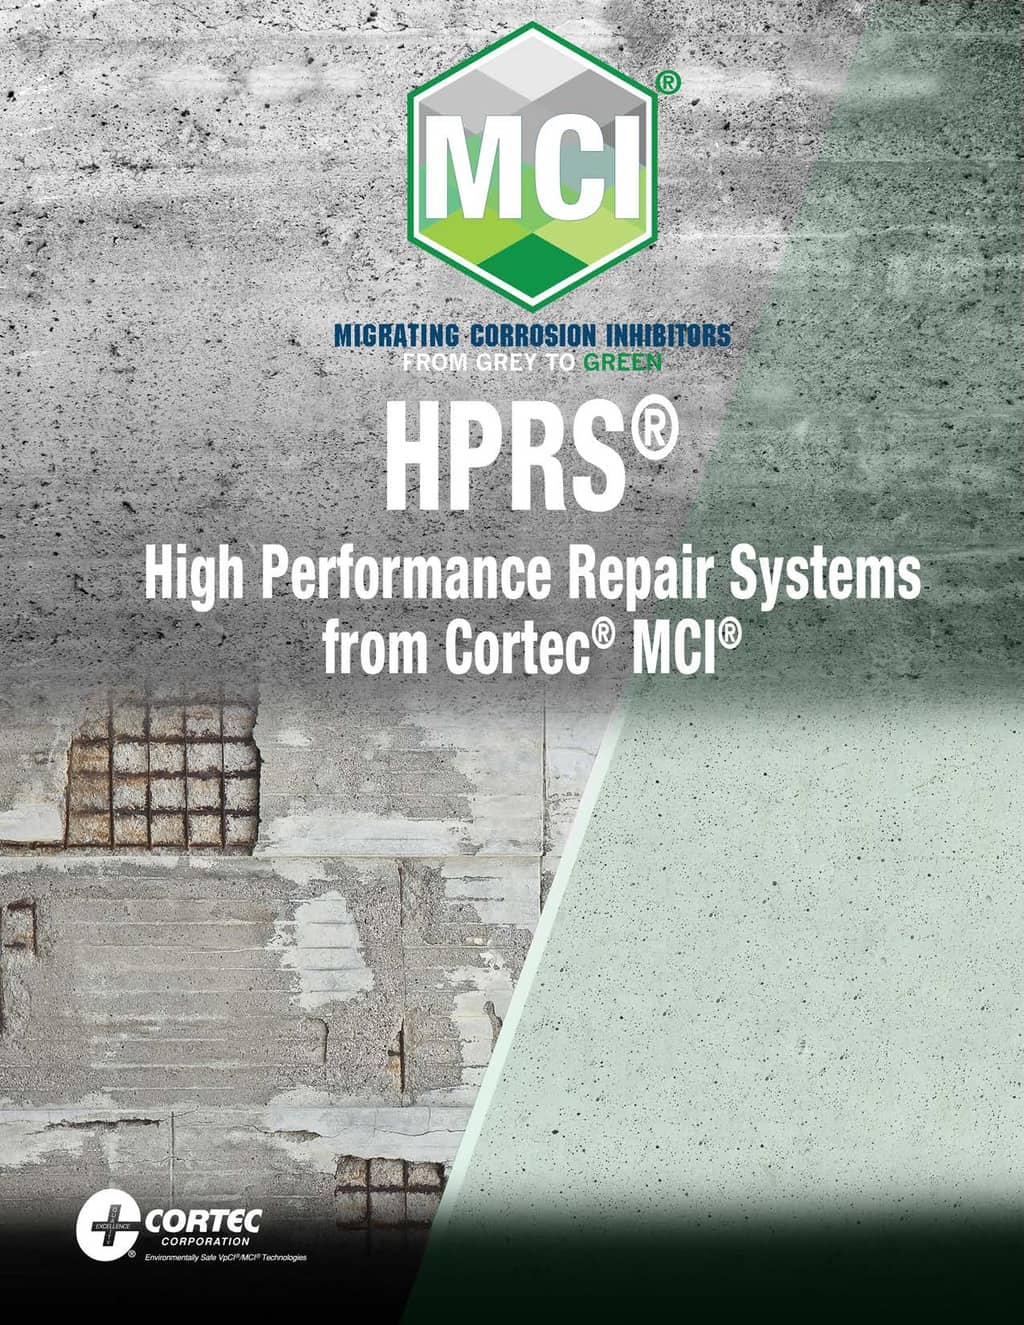 High Performance Repair Systems brochure showing mci products